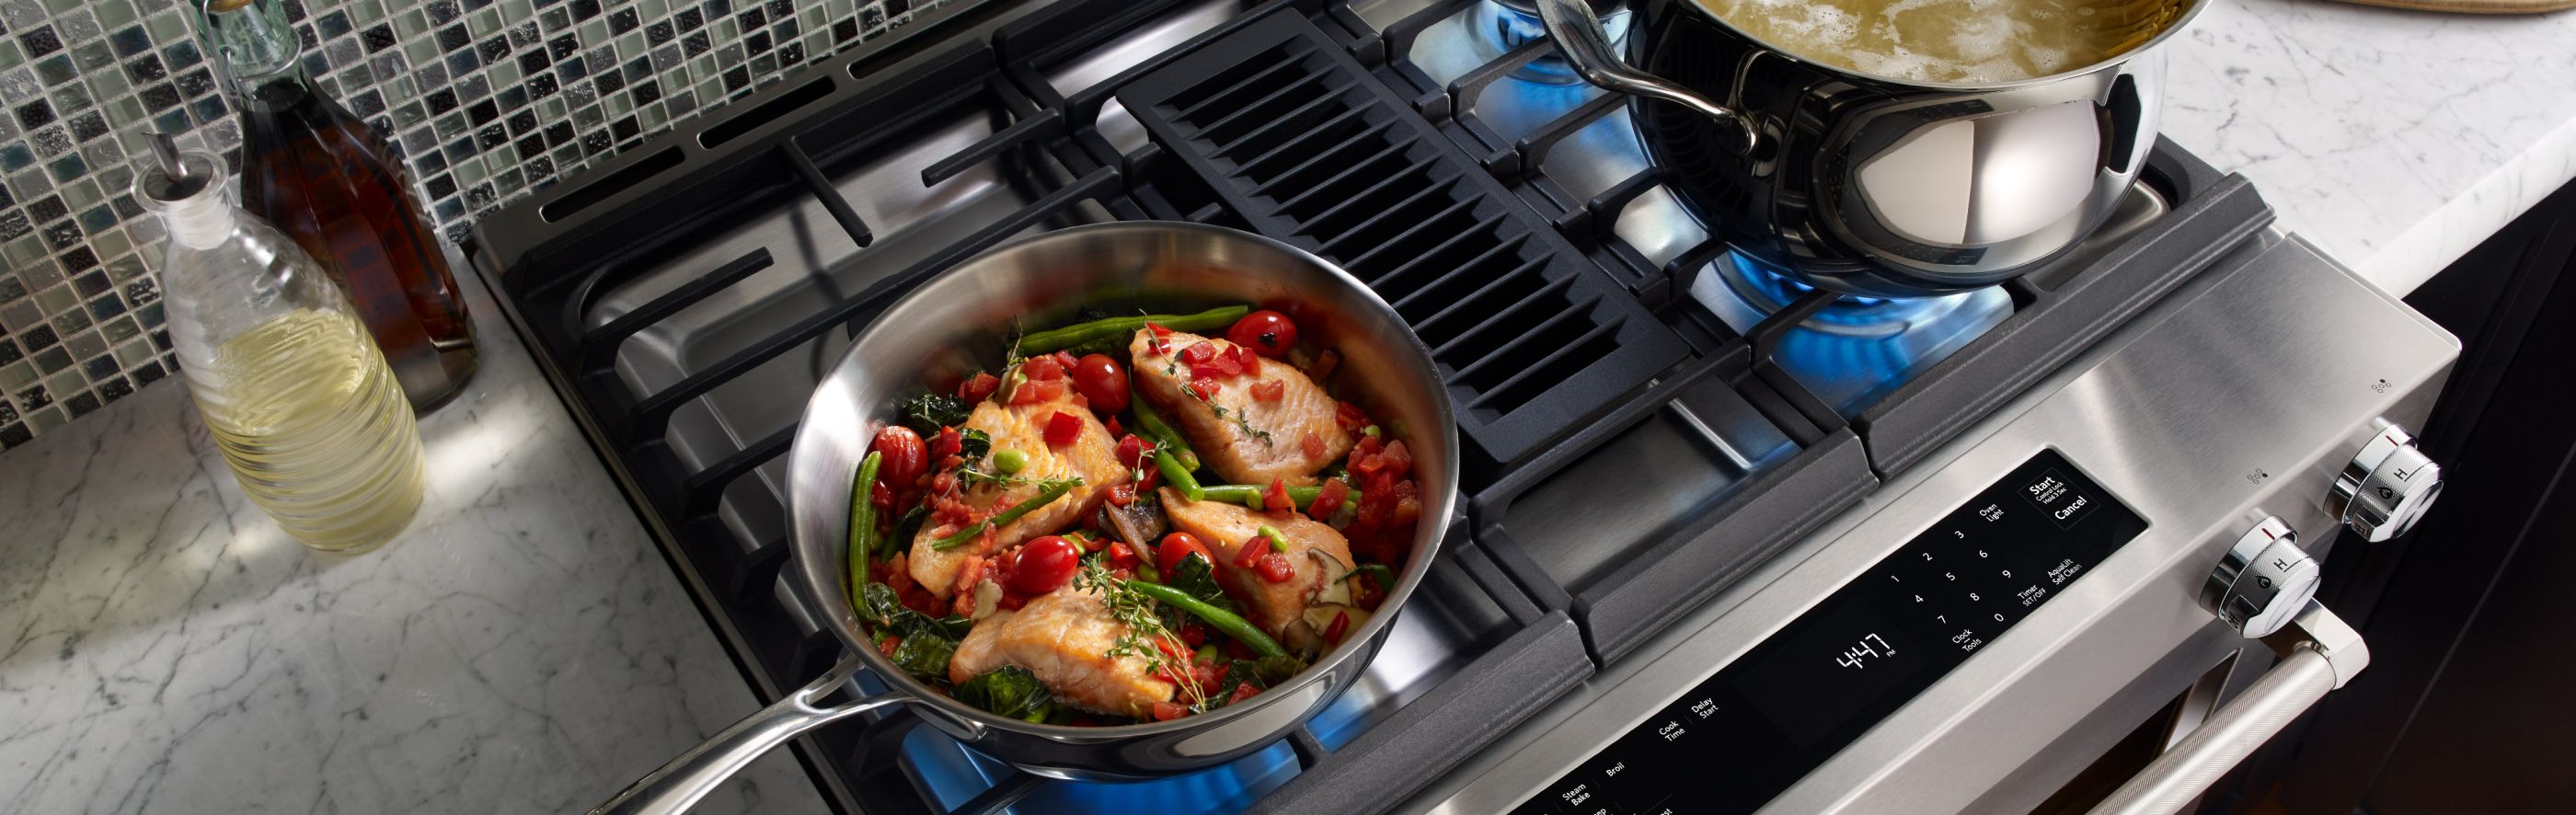 Food cooking on a downdraft gas range